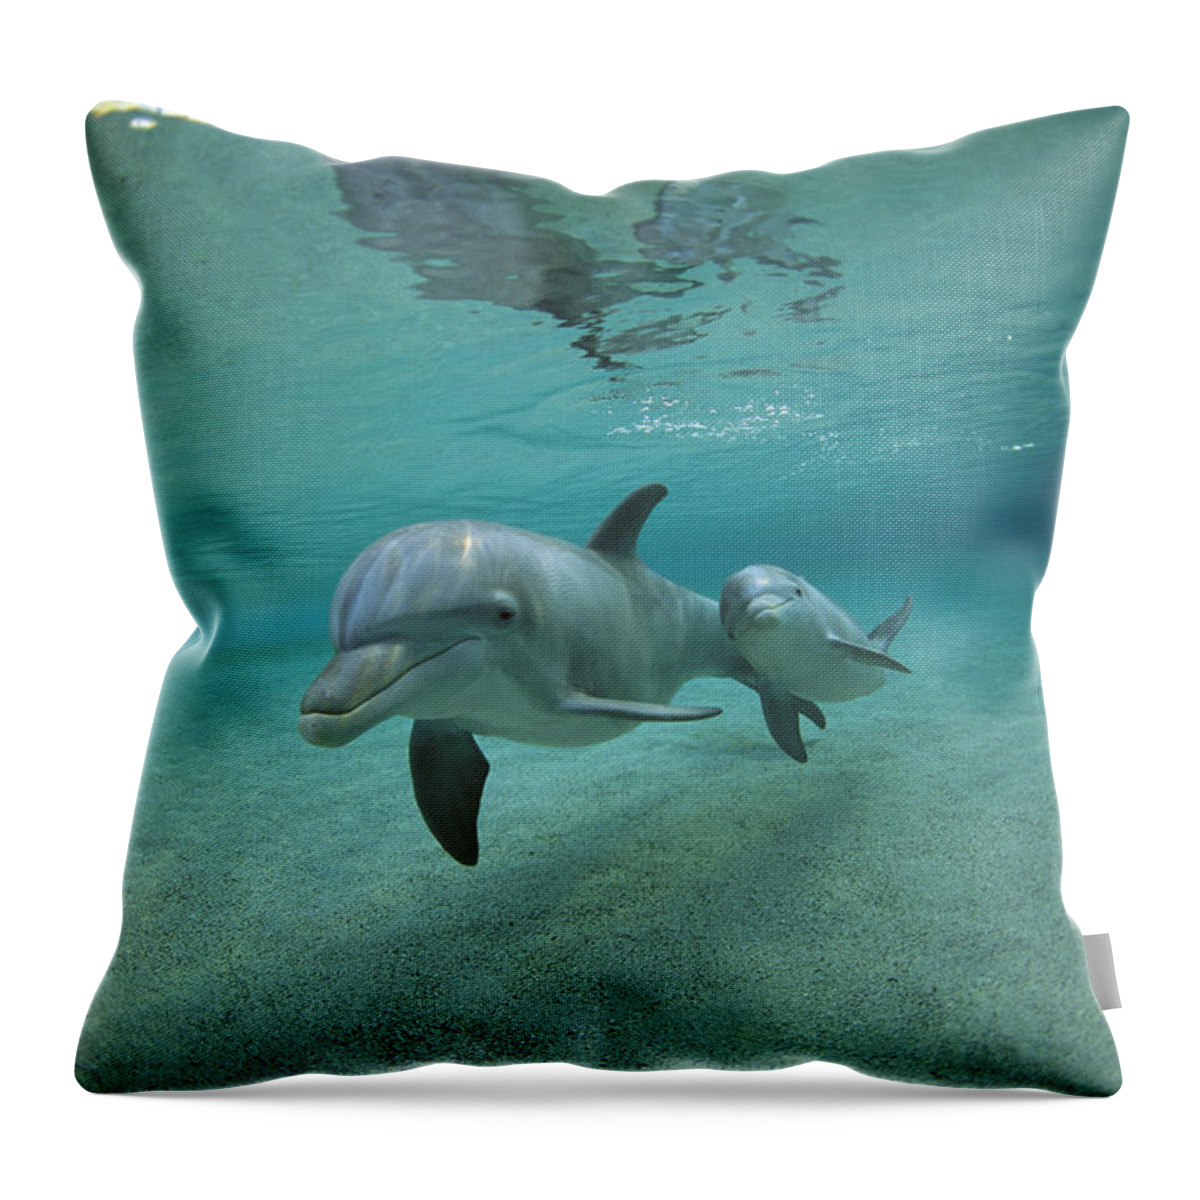 Feb0514 Throw Pillow featuring the photograph Bottlenose Dolphin Mother And Young #1 by Flip Nicklin